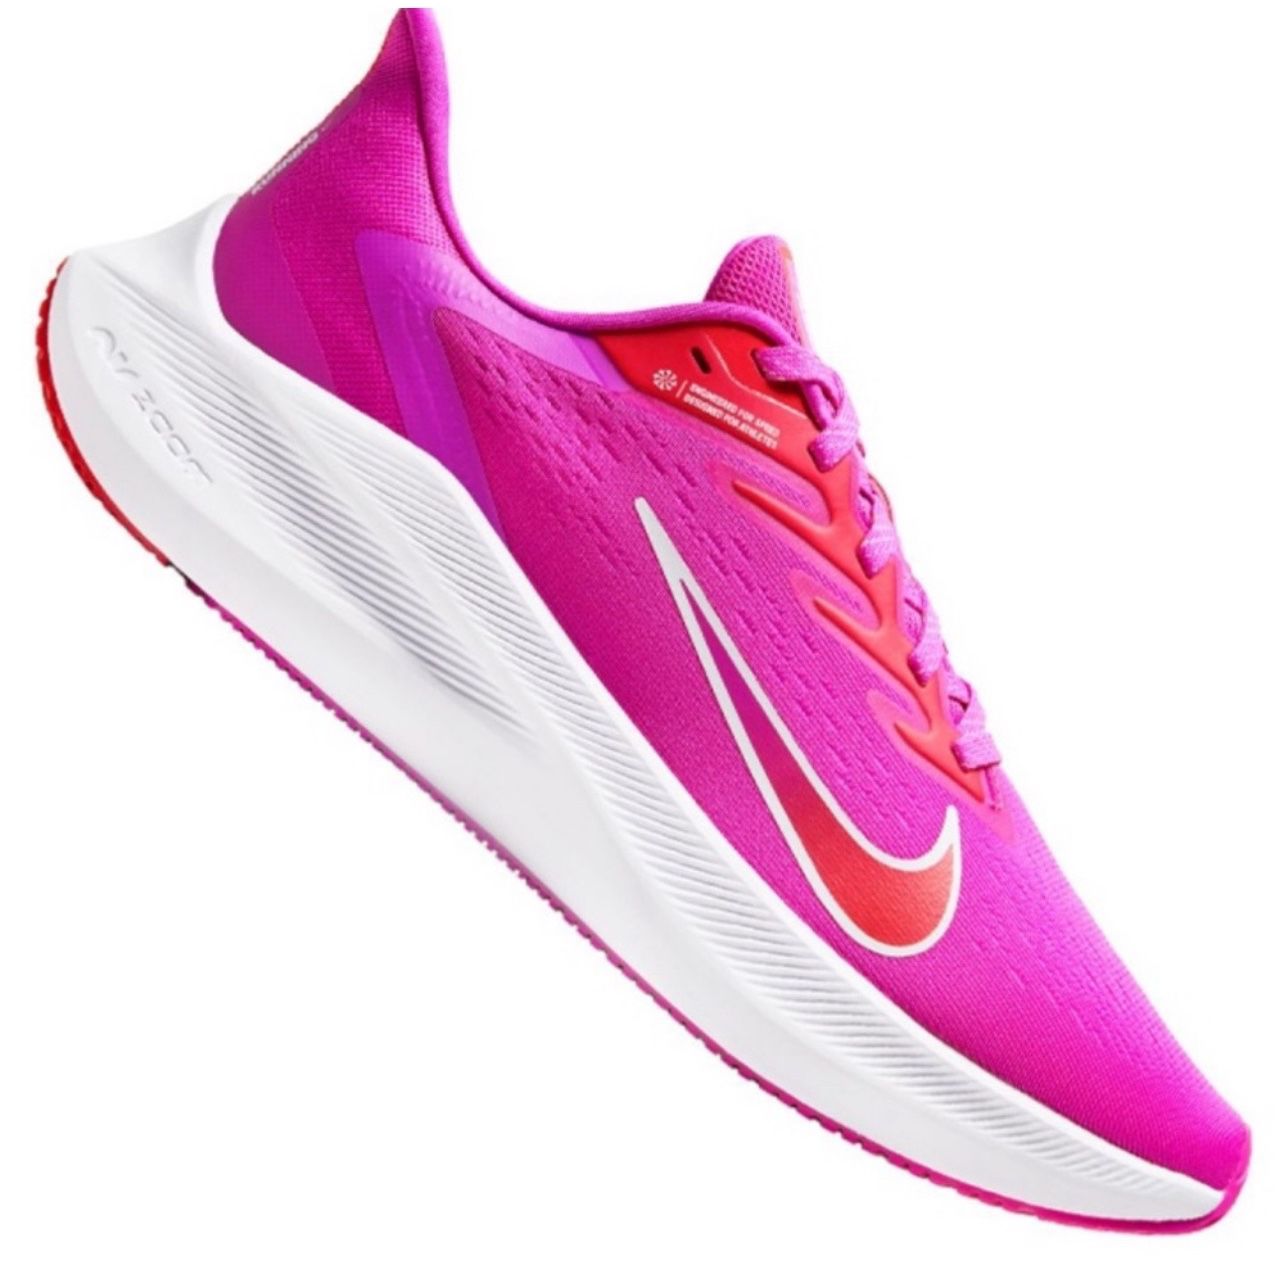 Nike Air Zoom Winflo 7 - Hot Pink - Size 10.5